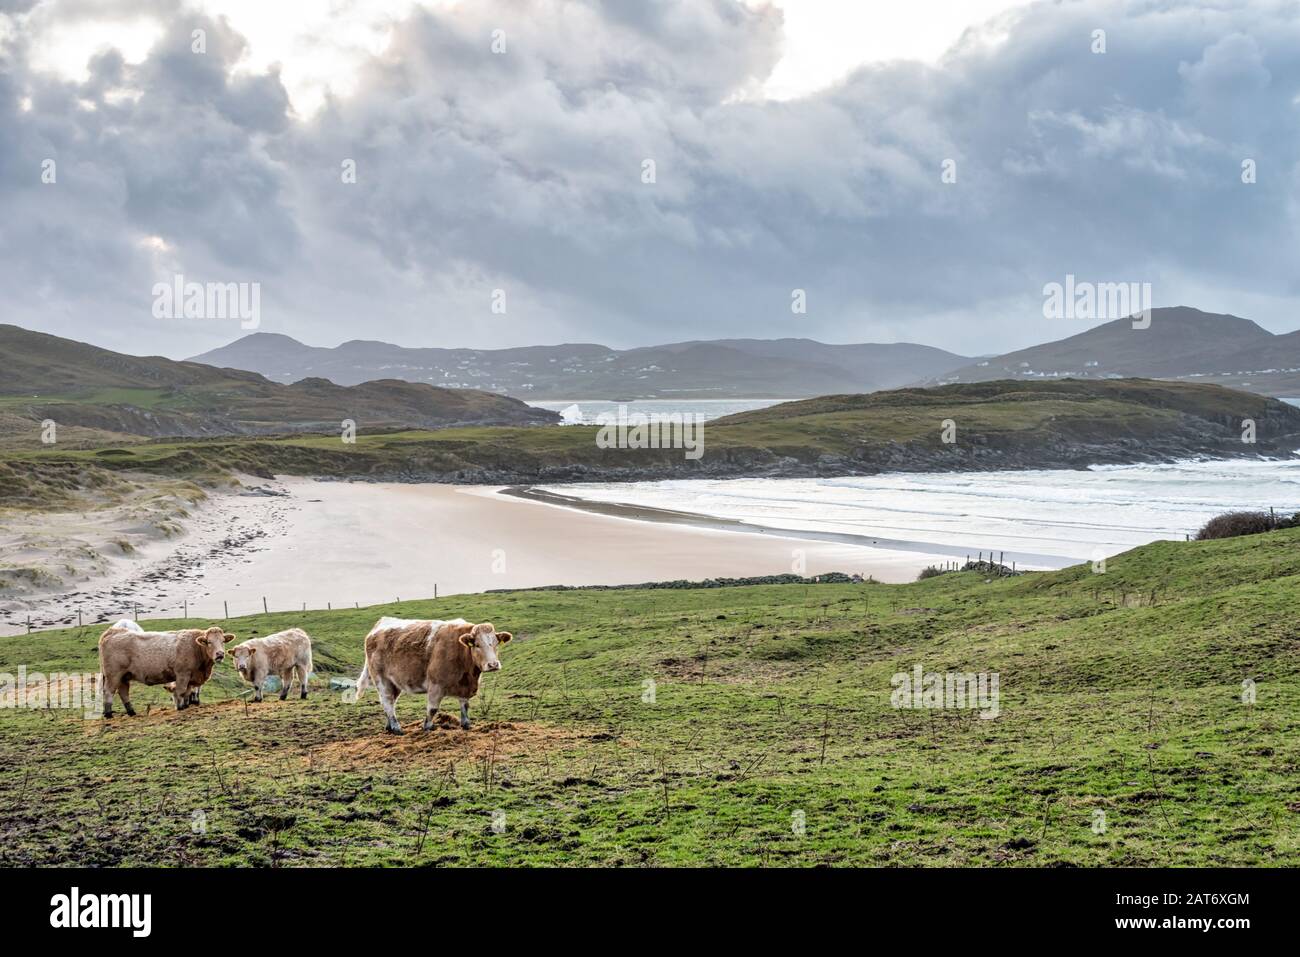 Cows grazing in a field near a beach in Donegal Ireland Stock Photo